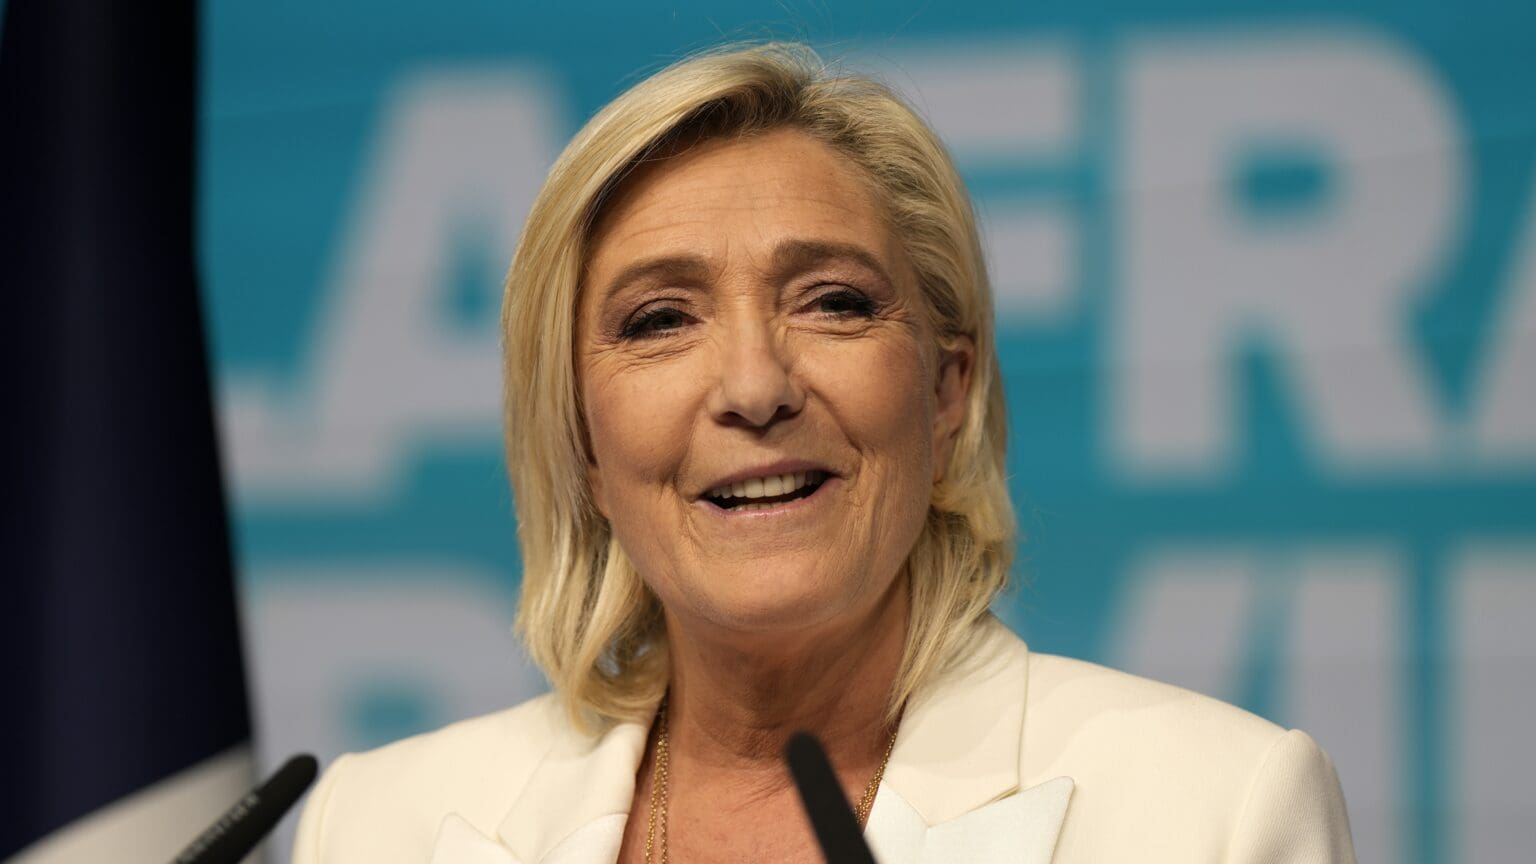 Right to Unite in France with Le Pen Becoming the Leader to Change the Country